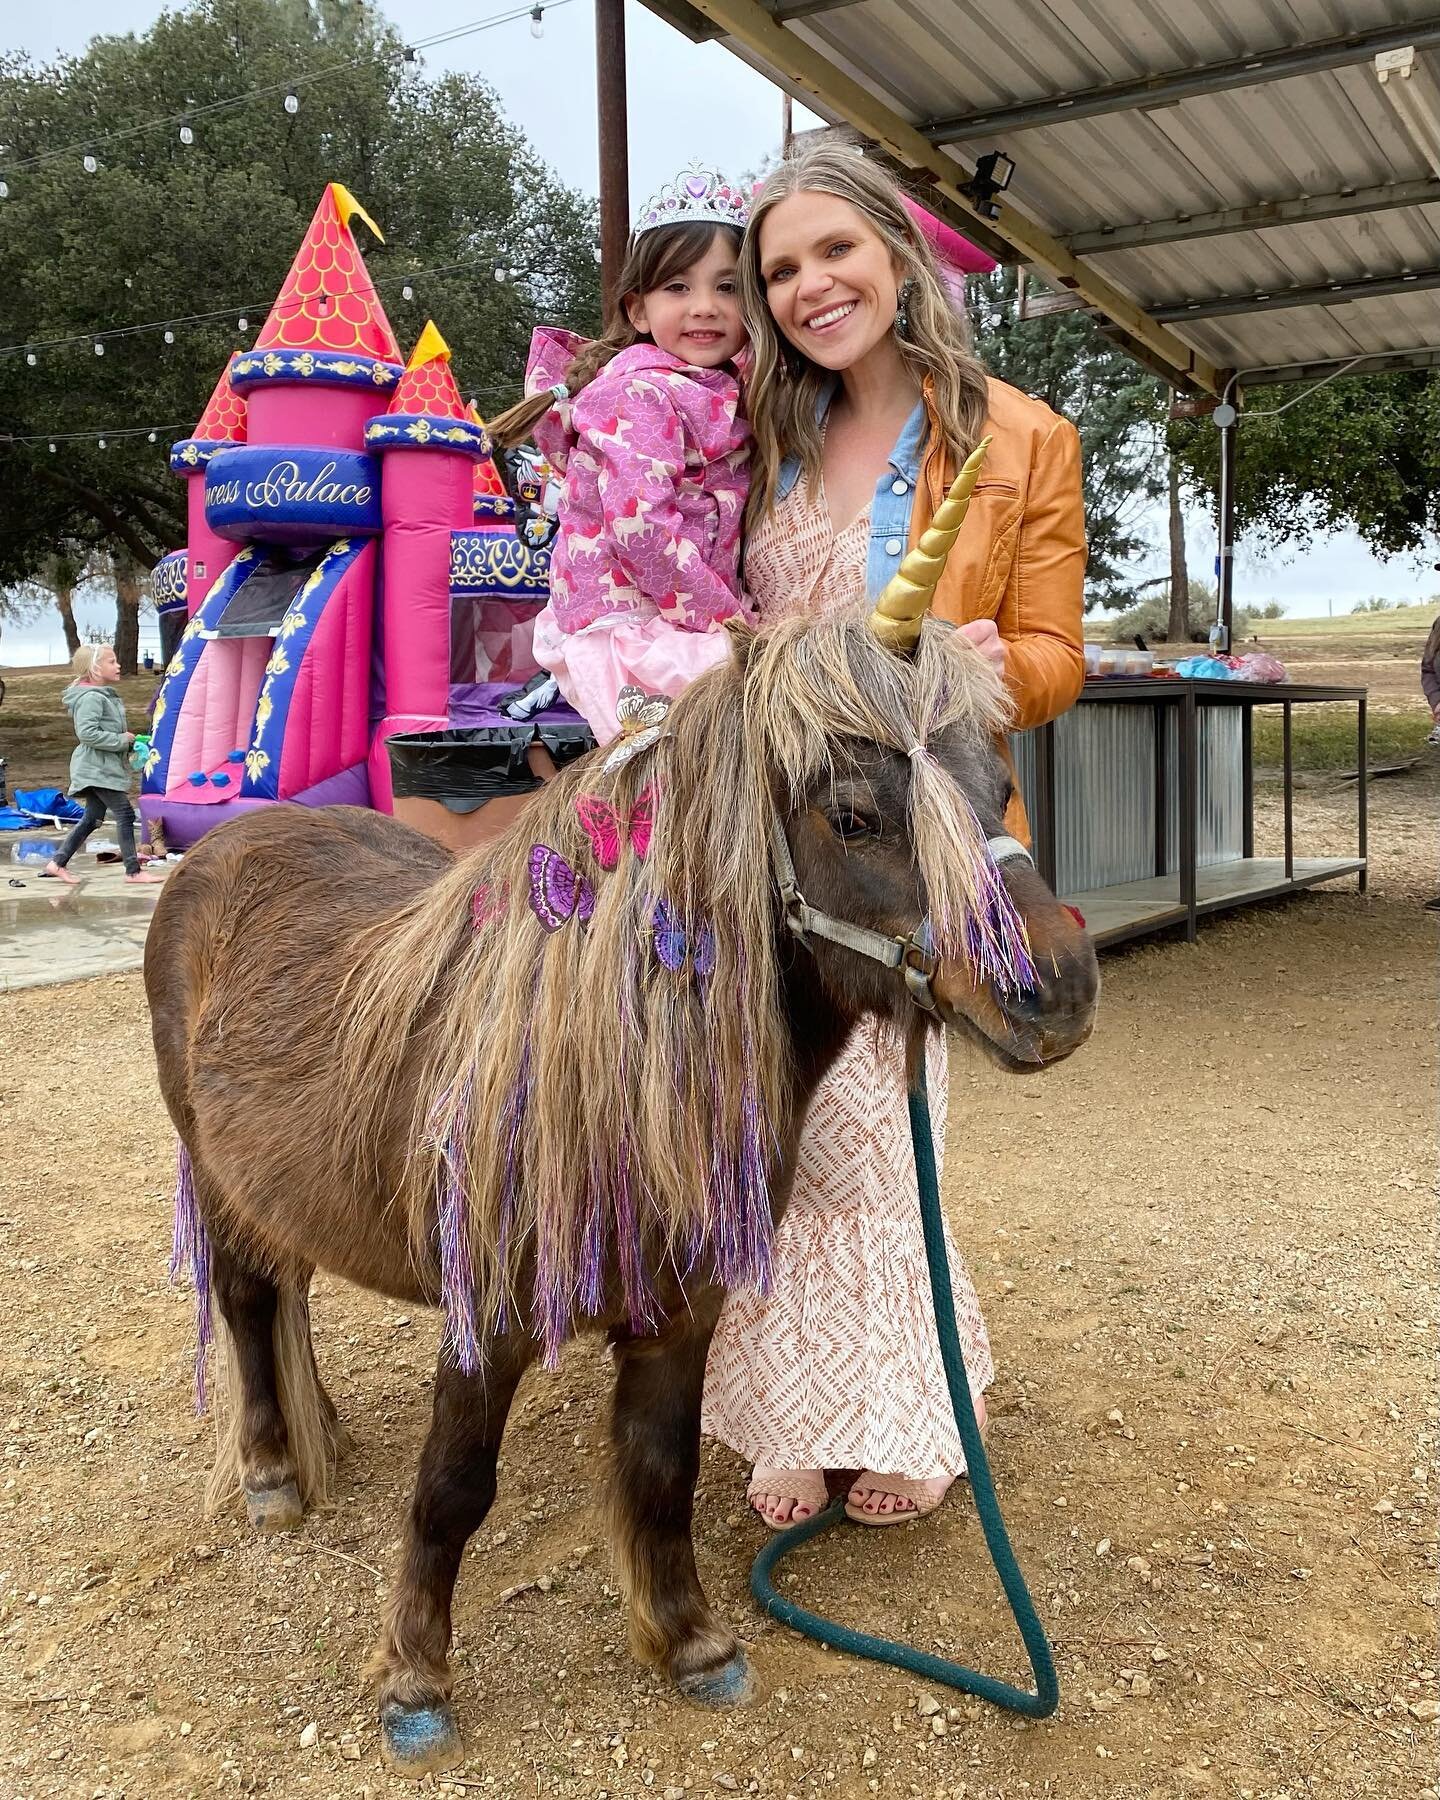 This weekend we celebrated my niece, Princess Cora, turning 4!

My sister-in-law @adrianetwisselman nailed the theme with a castle bounce house and for the grand finale, my aunt @staceyneiletwisselman driving a unicorn-drawn chariot carrying princess